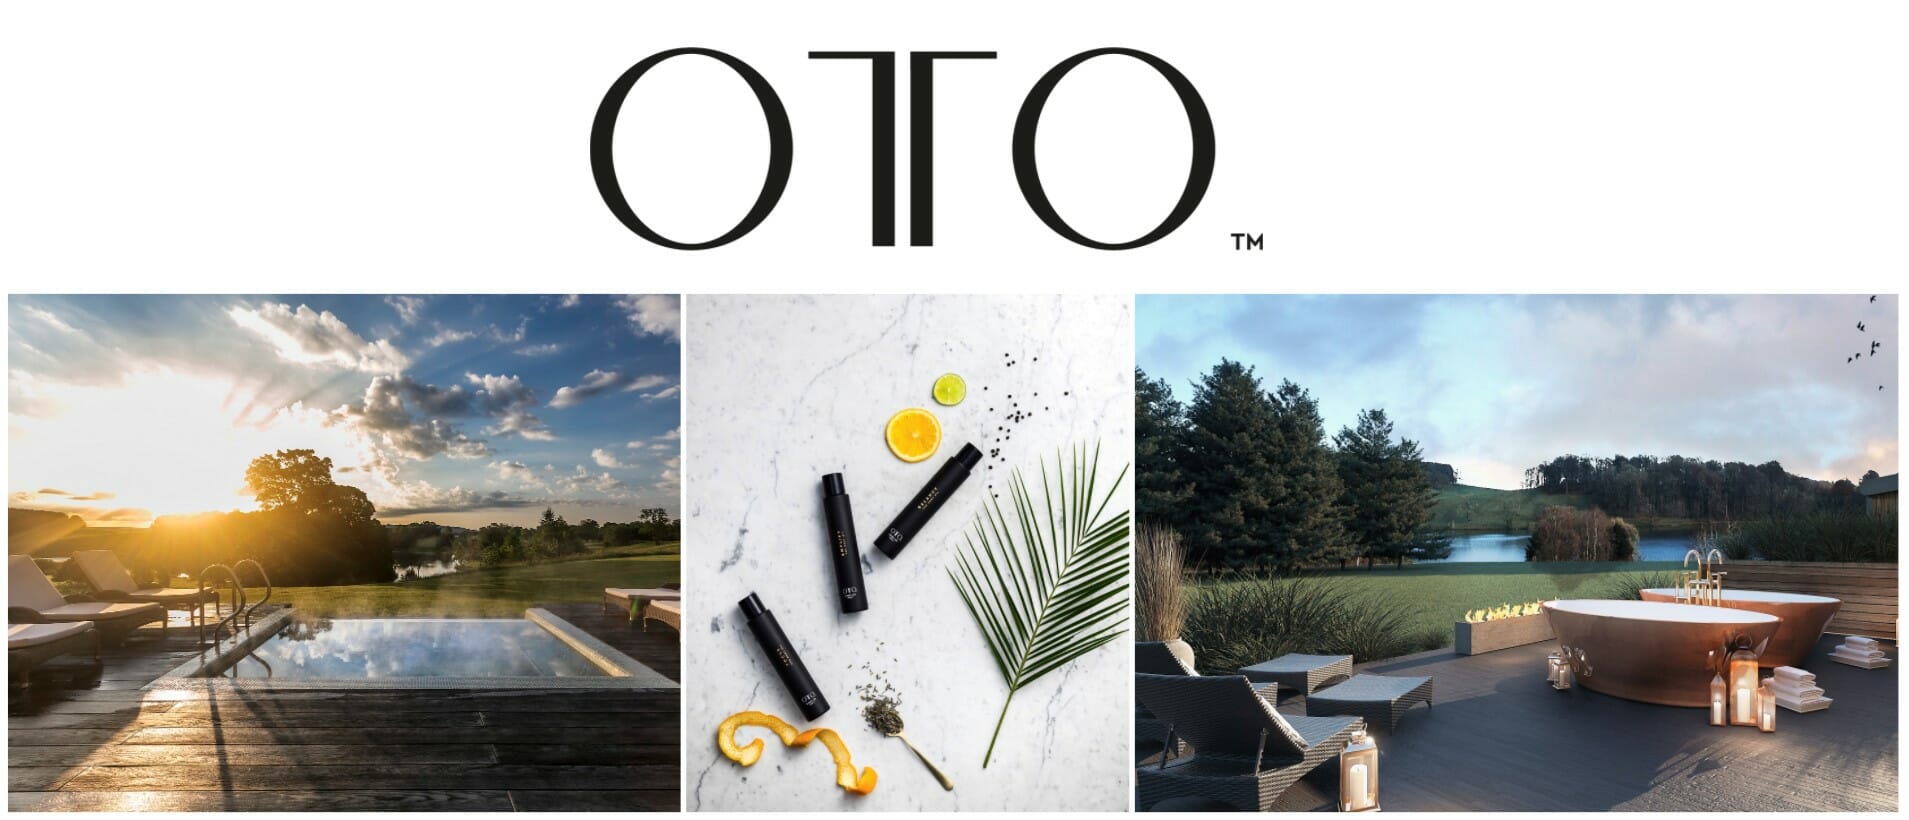 OTO ANNOUNCES THE CONISTON AS FIRST HOTEL PARTNER TO LAUNCH ITS CBD SENSORY SPA EXPERIENCES